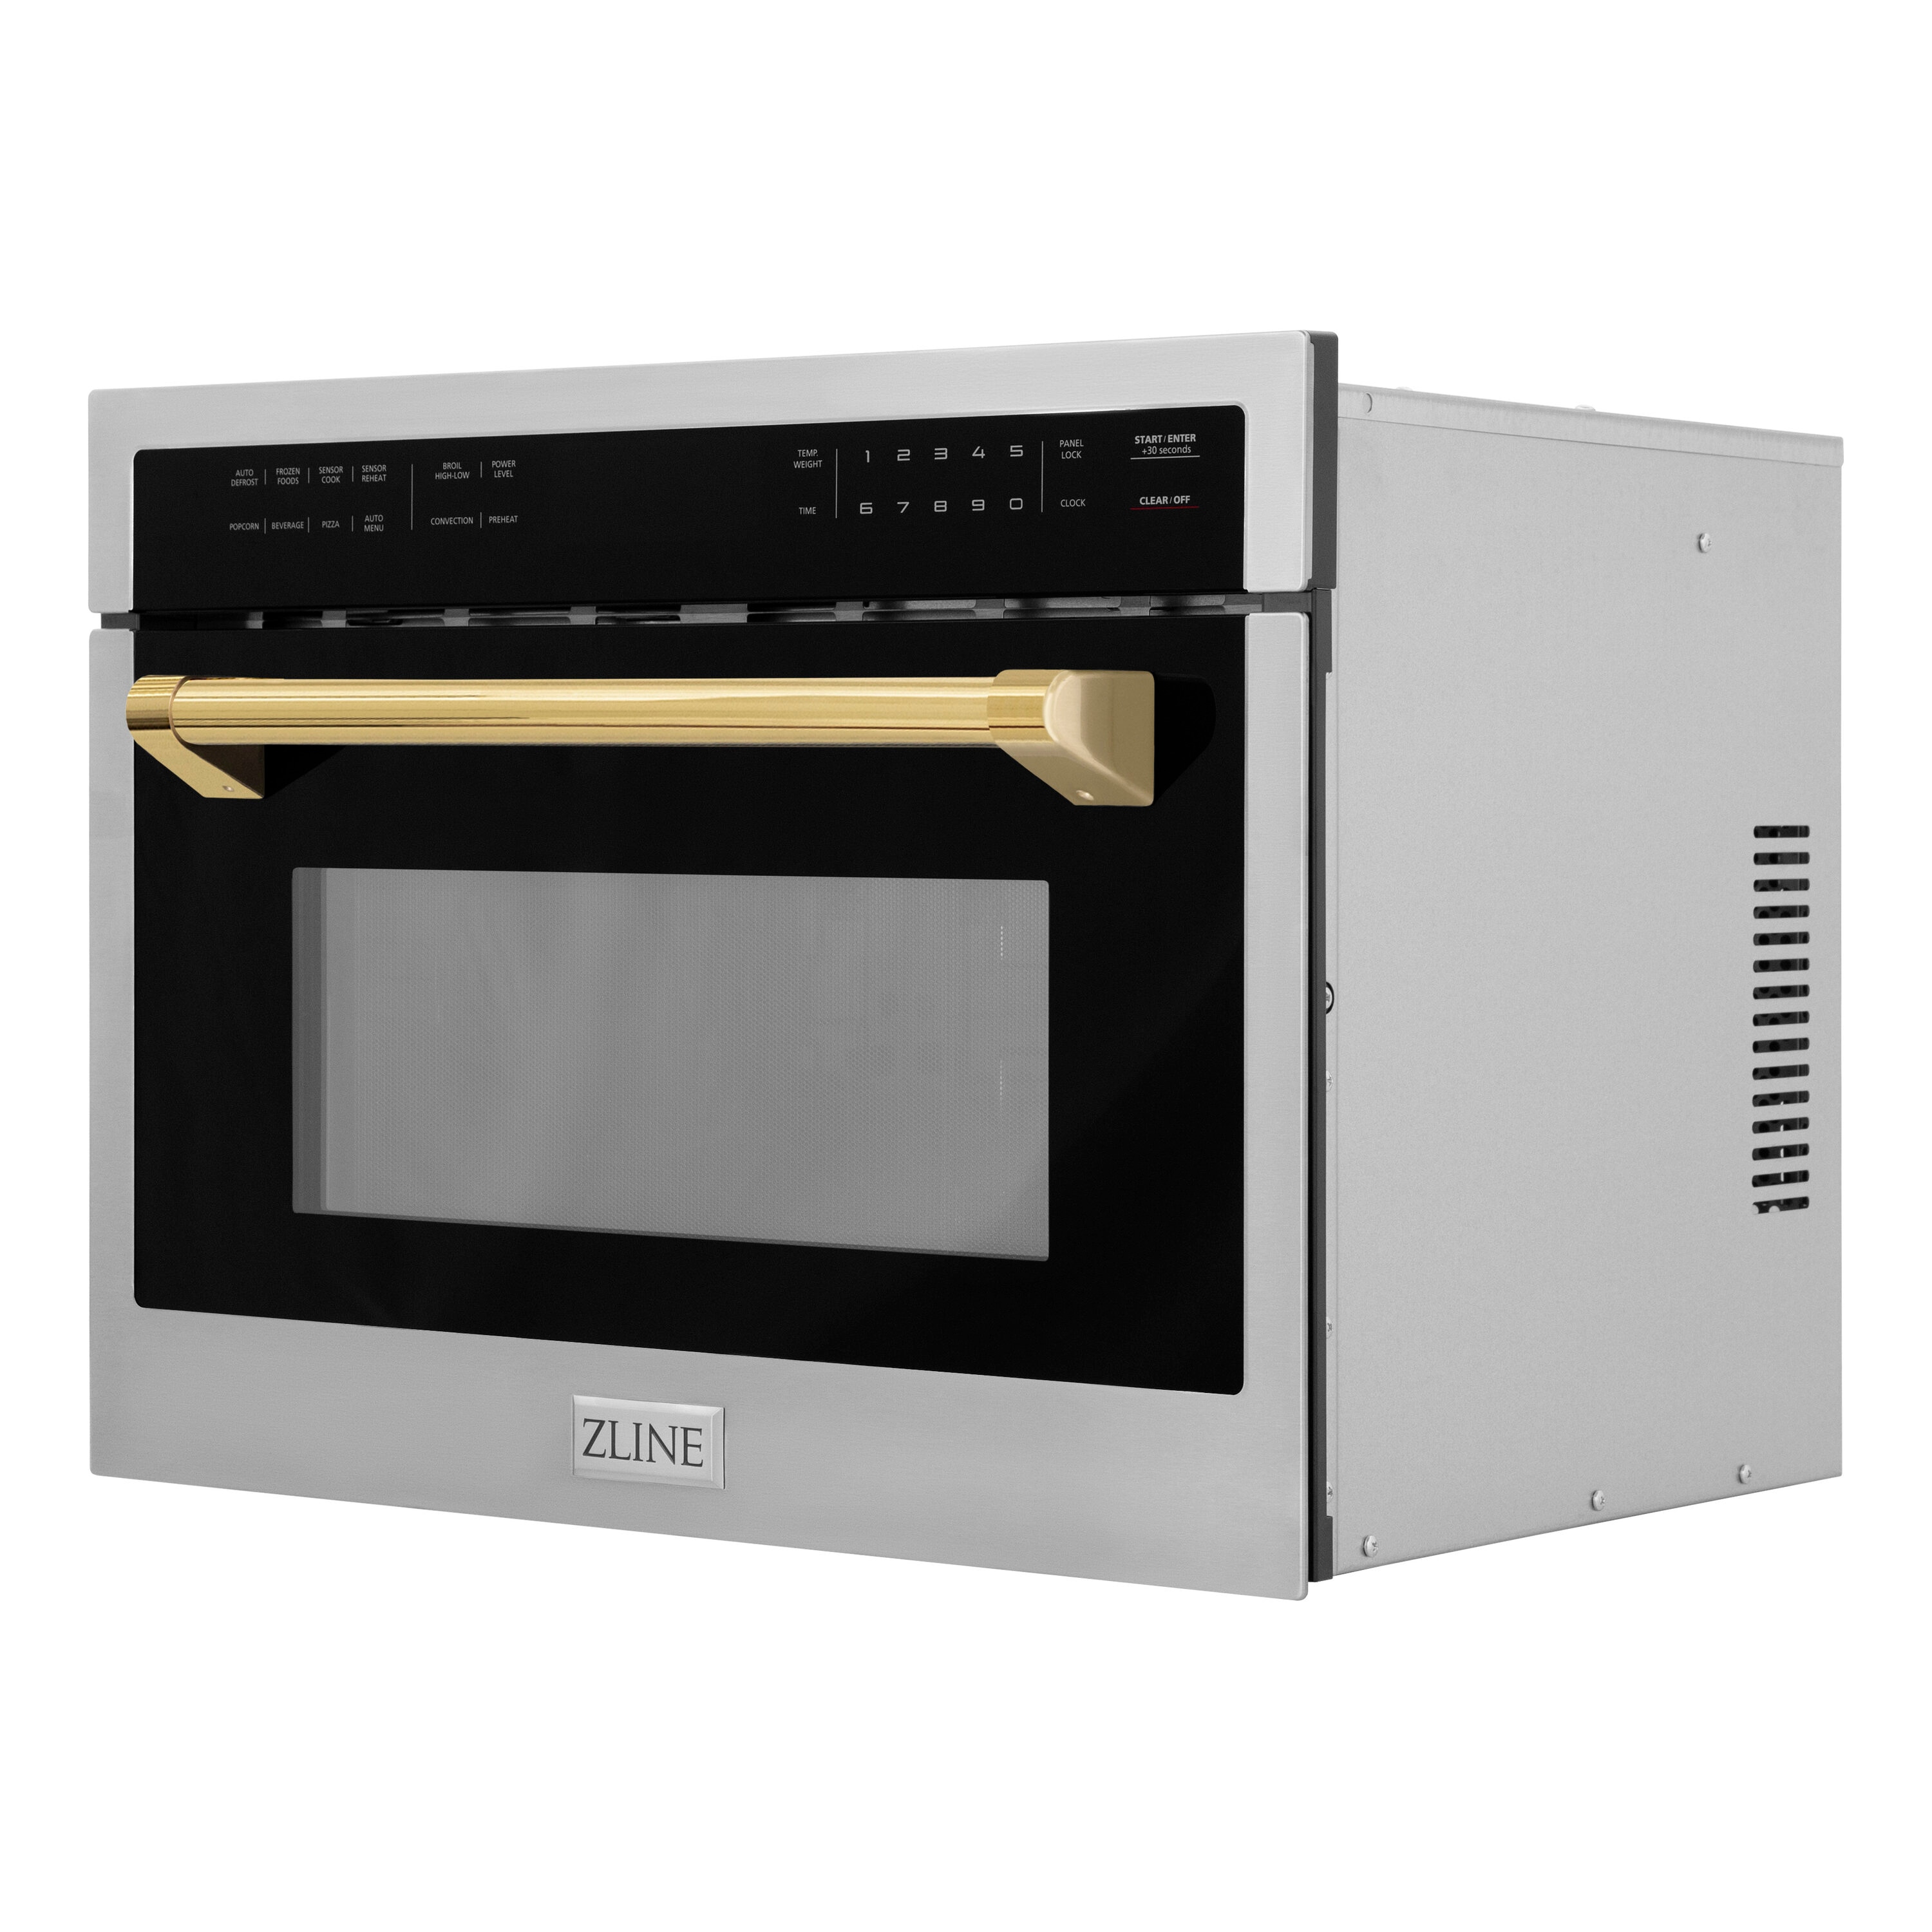 BUILT-IN 0.7 Cu. Ft. Deluxe Microwave Oven w/ Trim Kit - Stainless